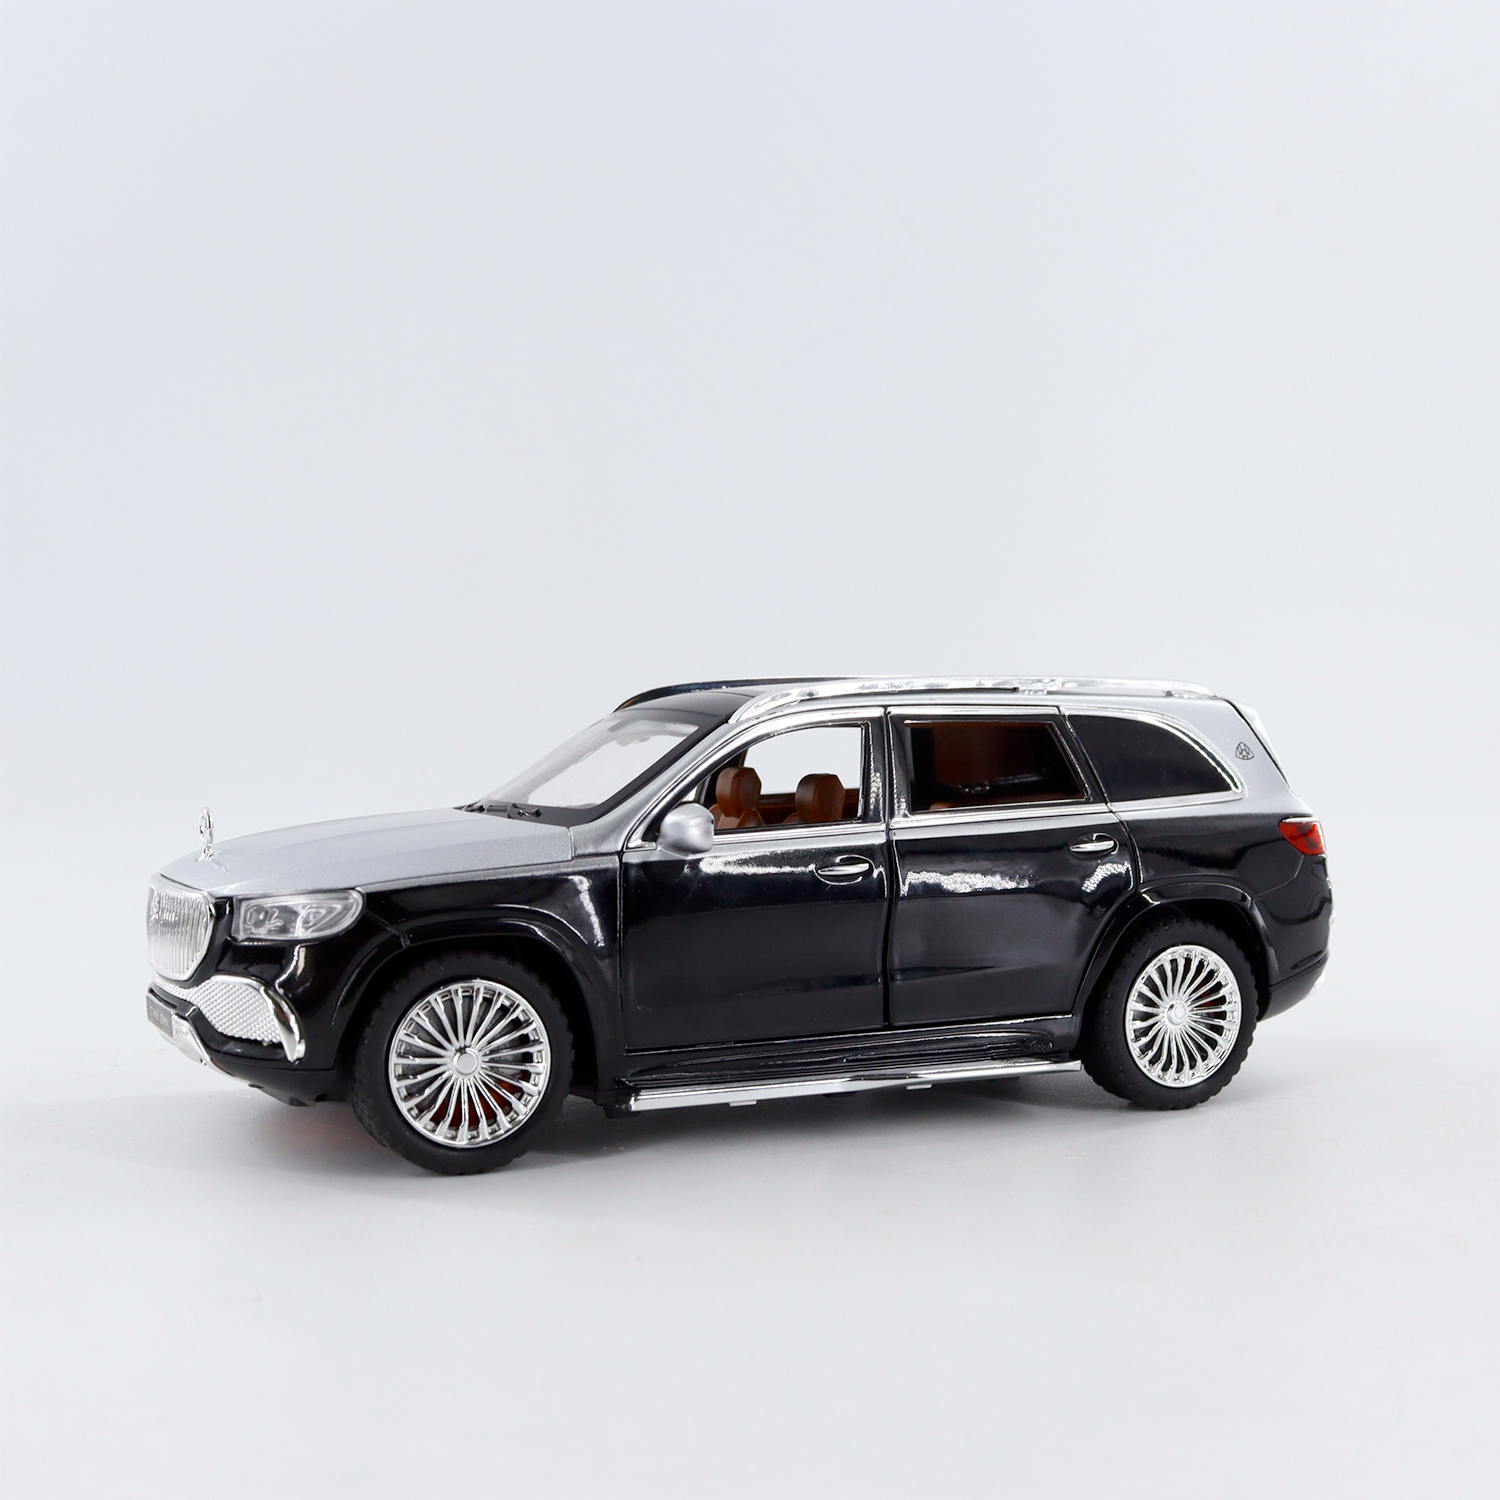 Alloy Car Model Large Size Diecast Metal Car Collection Home Decoration Chidlren Boy Gift Toy Vehicles